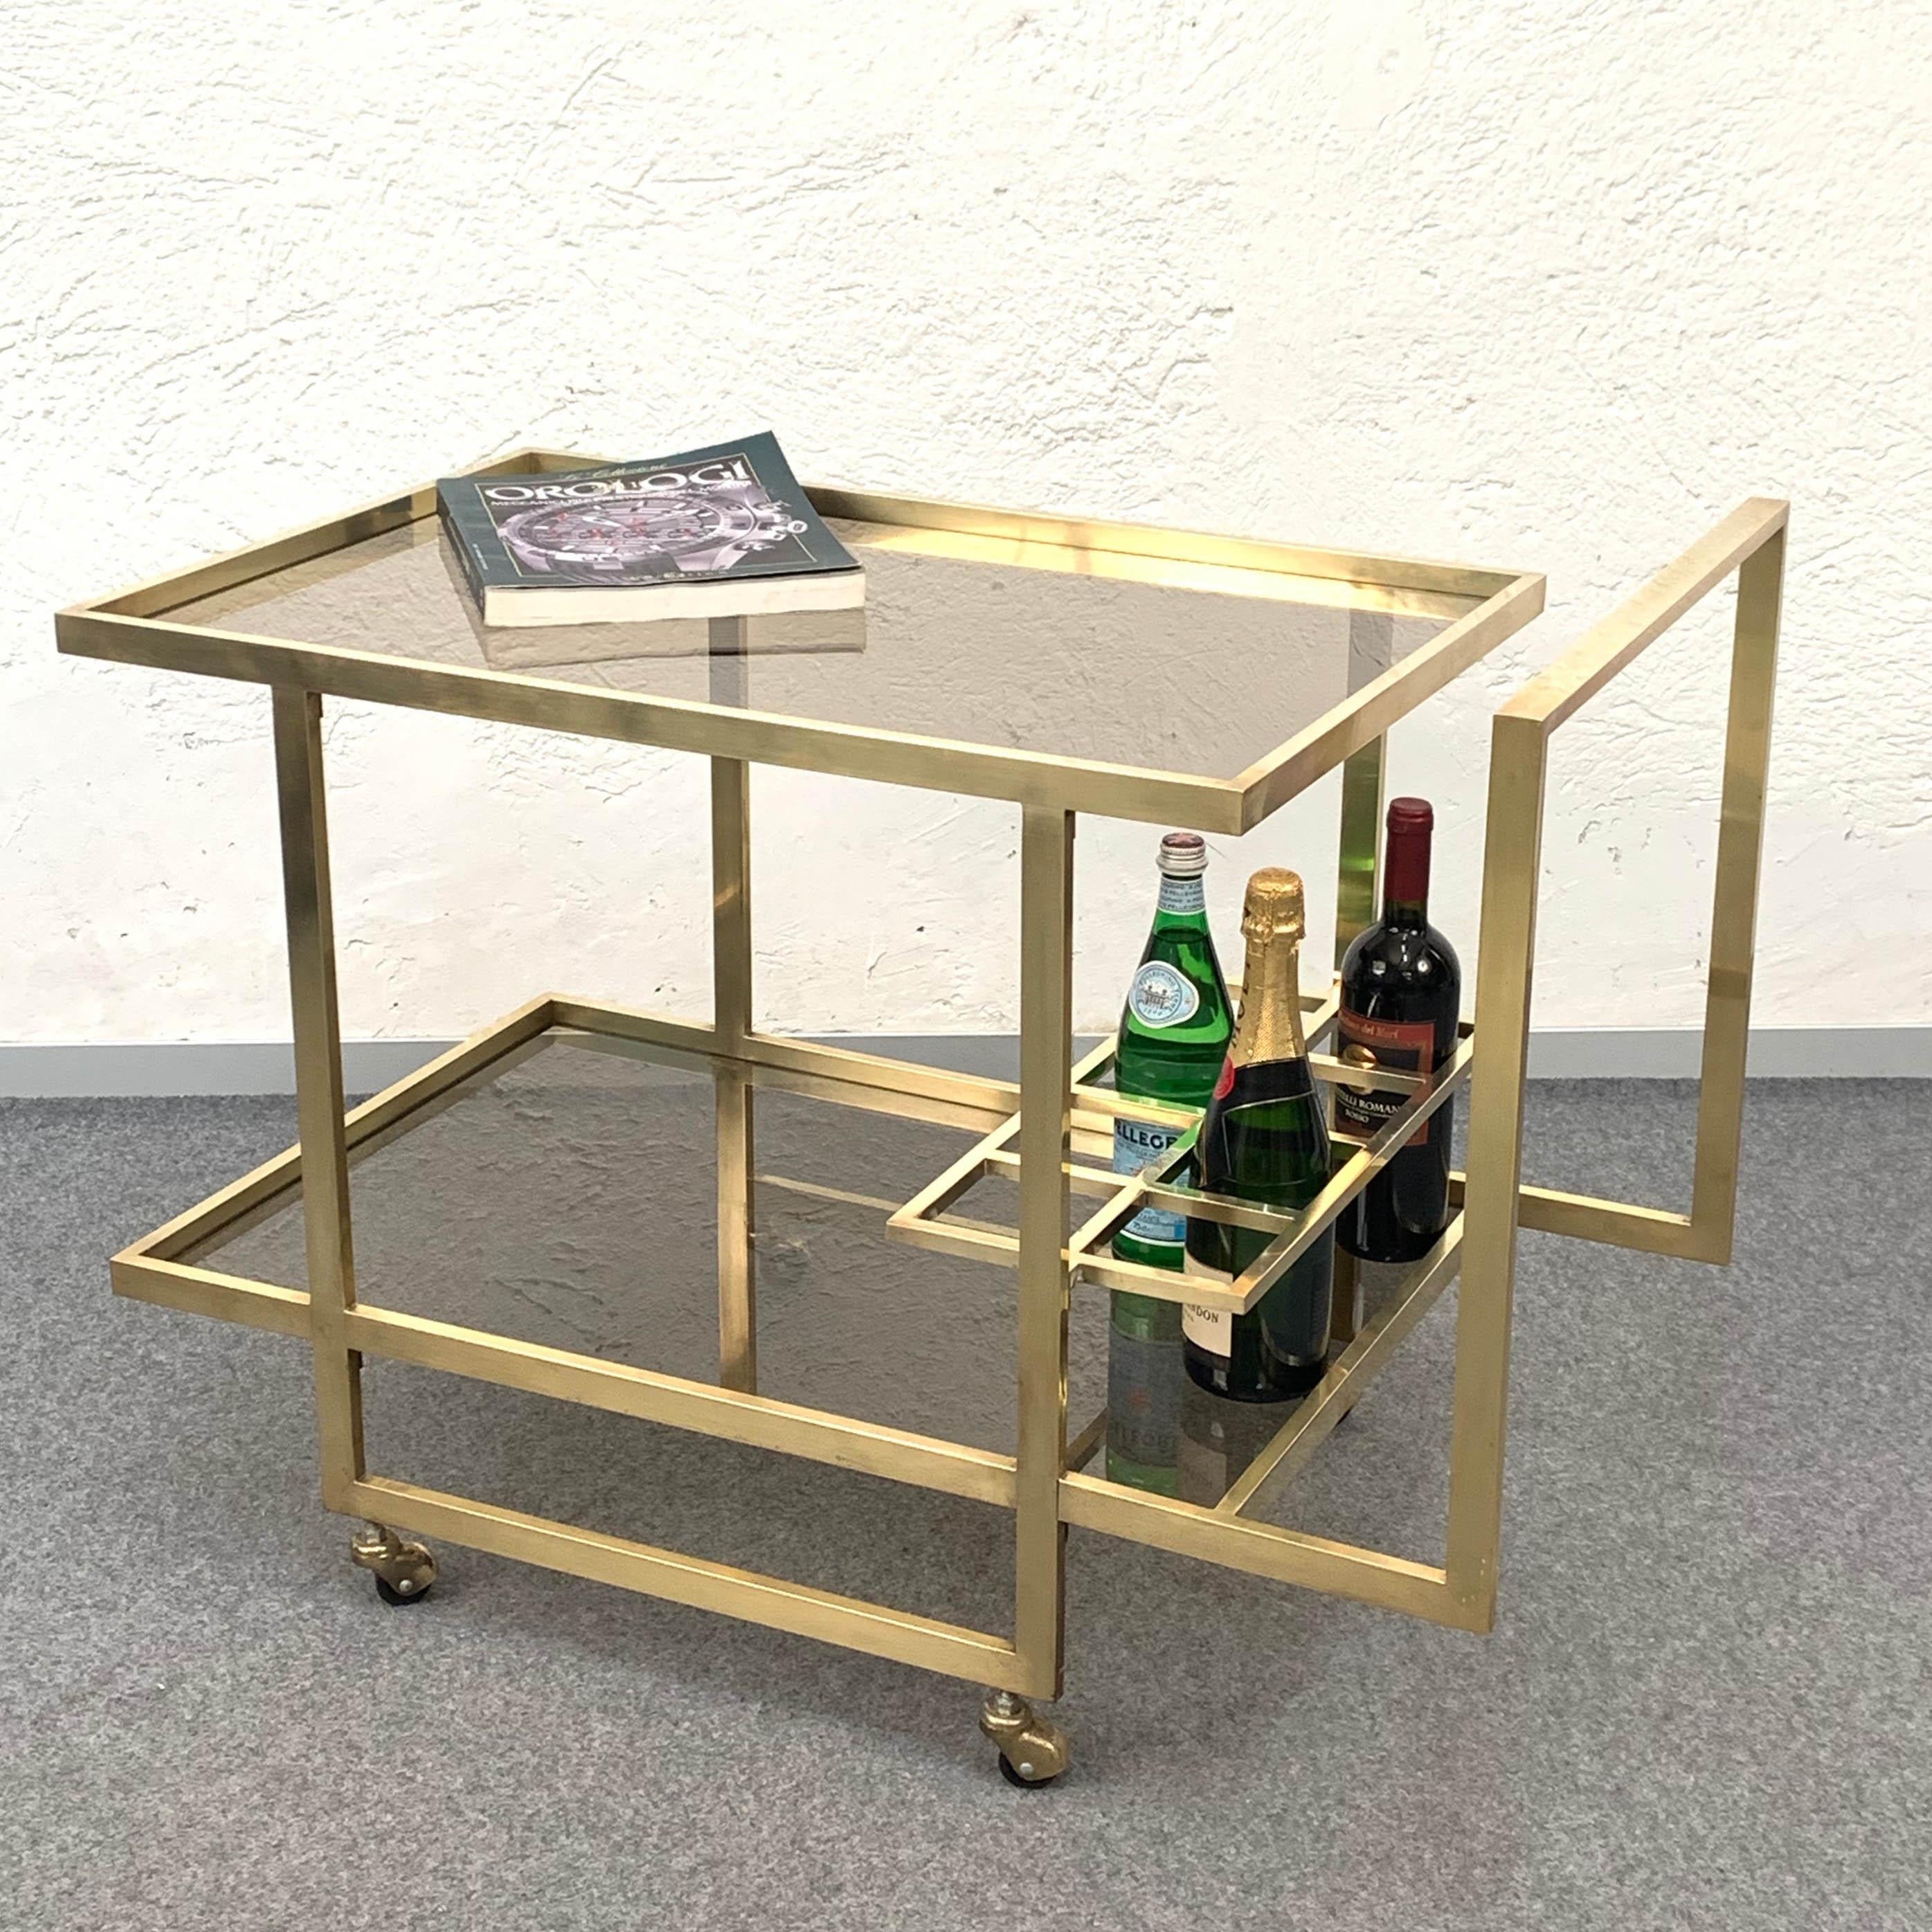 Midcentury Two Levels Smoked Glass and Brass Bar Cart with Bottle Holder, 1970s For Sale 4